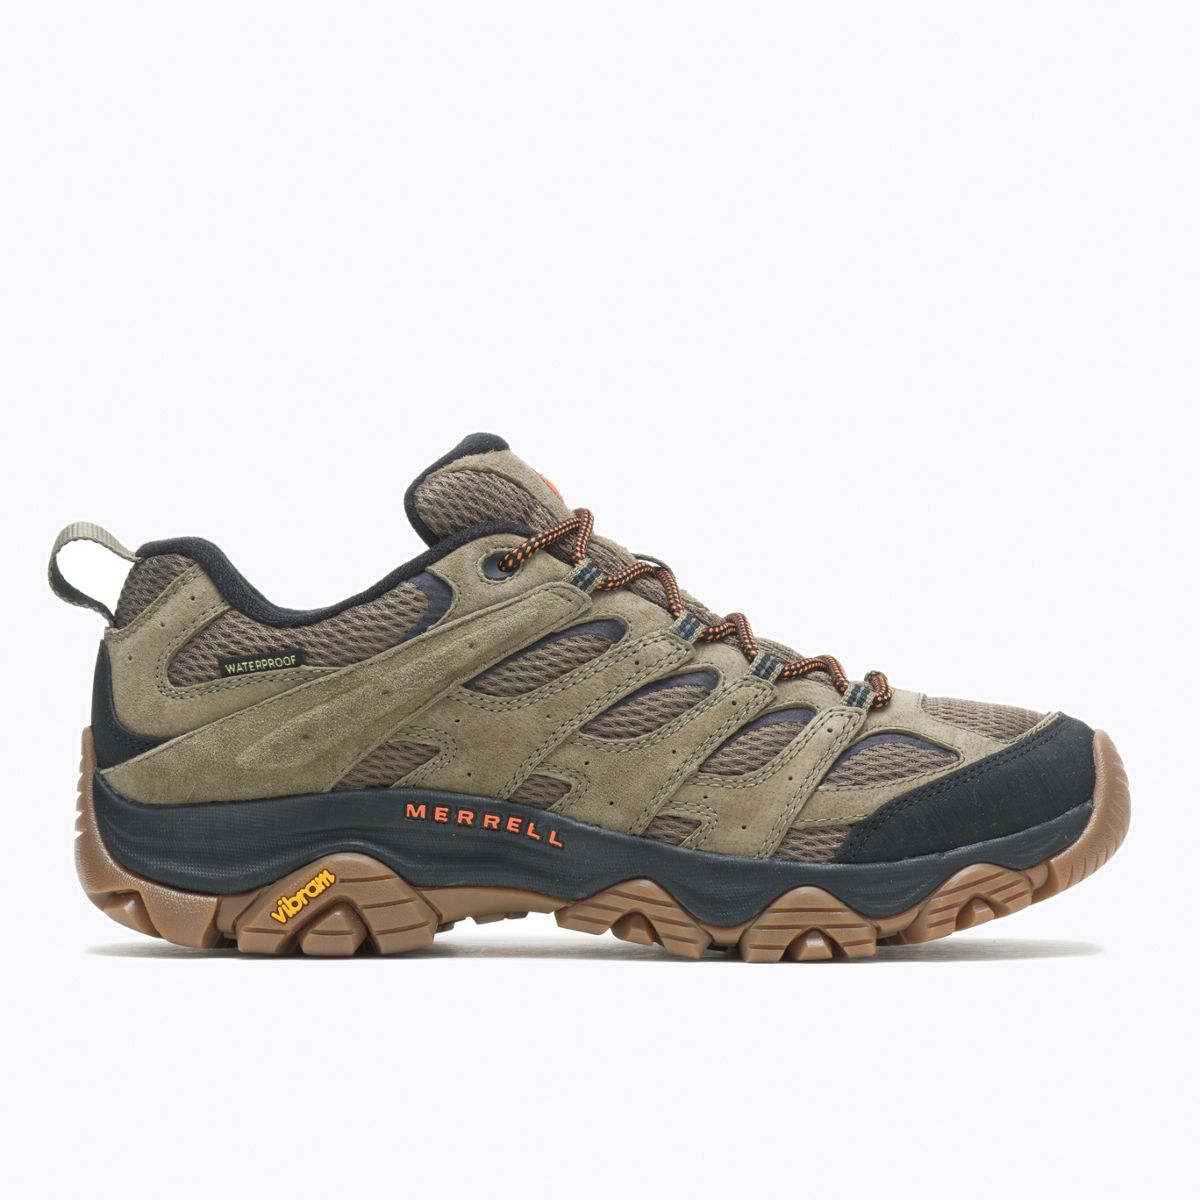 Merrell Shoes Sale 2023: Take 25% Off GQ-Approved Hiking Boots